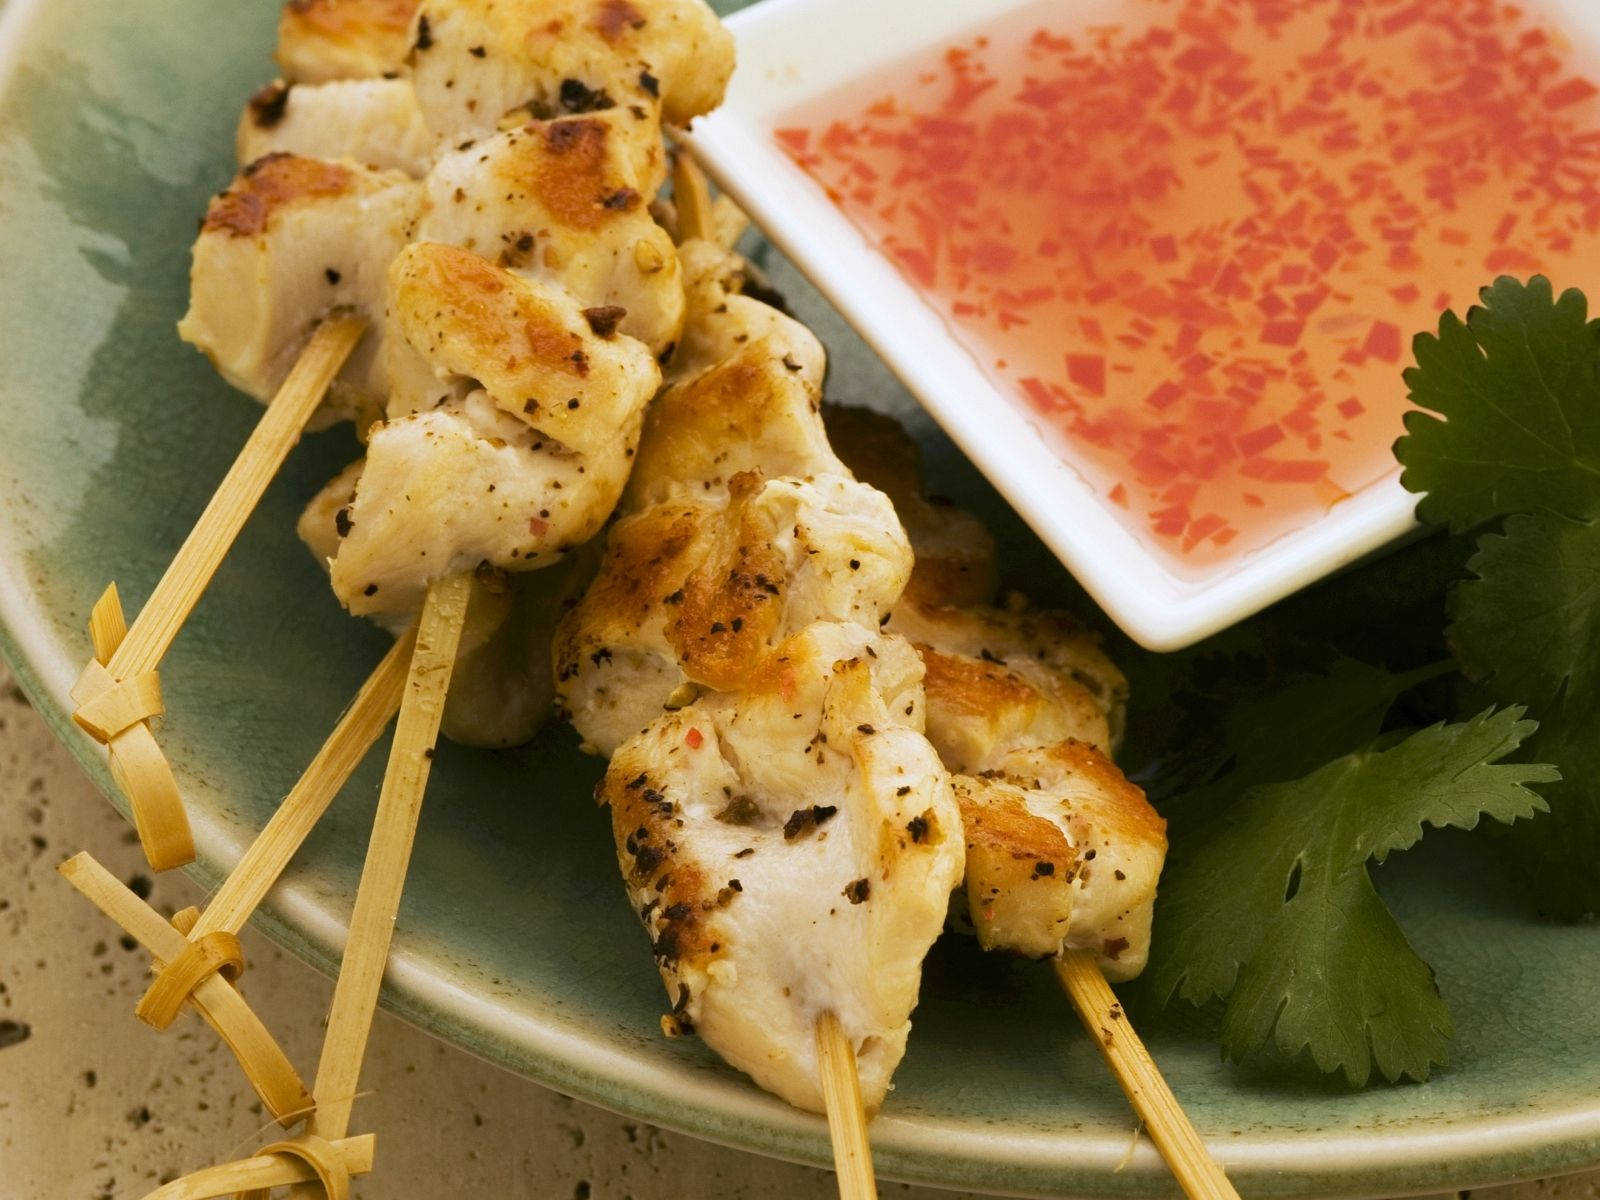 Delicious and savory Satay dish served with spicy chili sauce and fresh coriander leaves Wallpaper